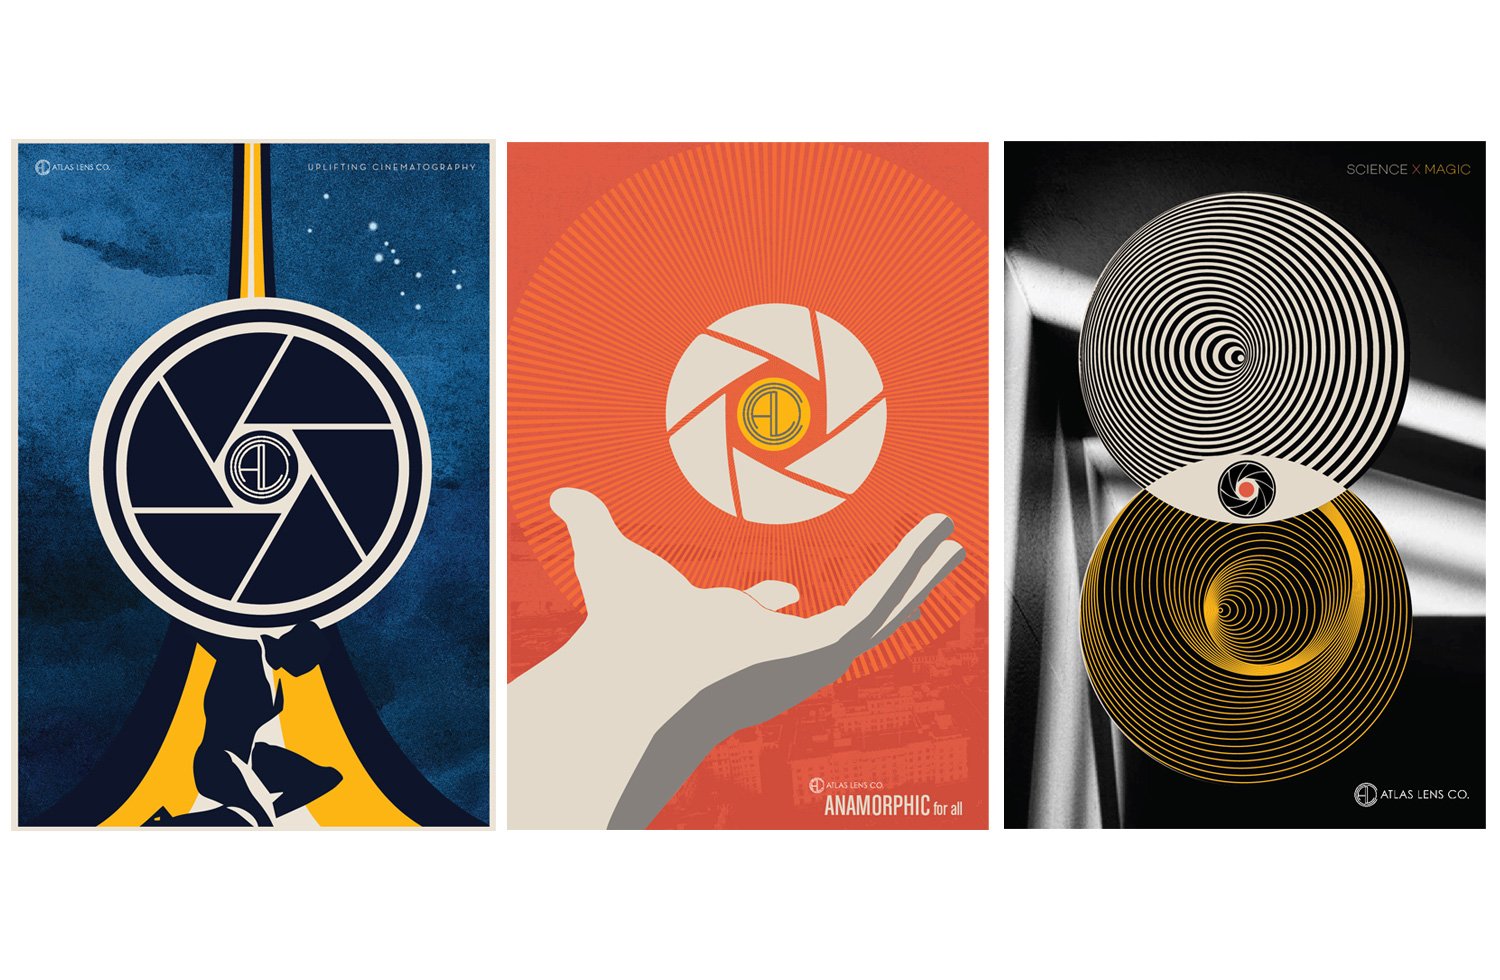  Series of proposed posters for Atlas Lens Co. maker of anamorphic lenses for TV and Film. 